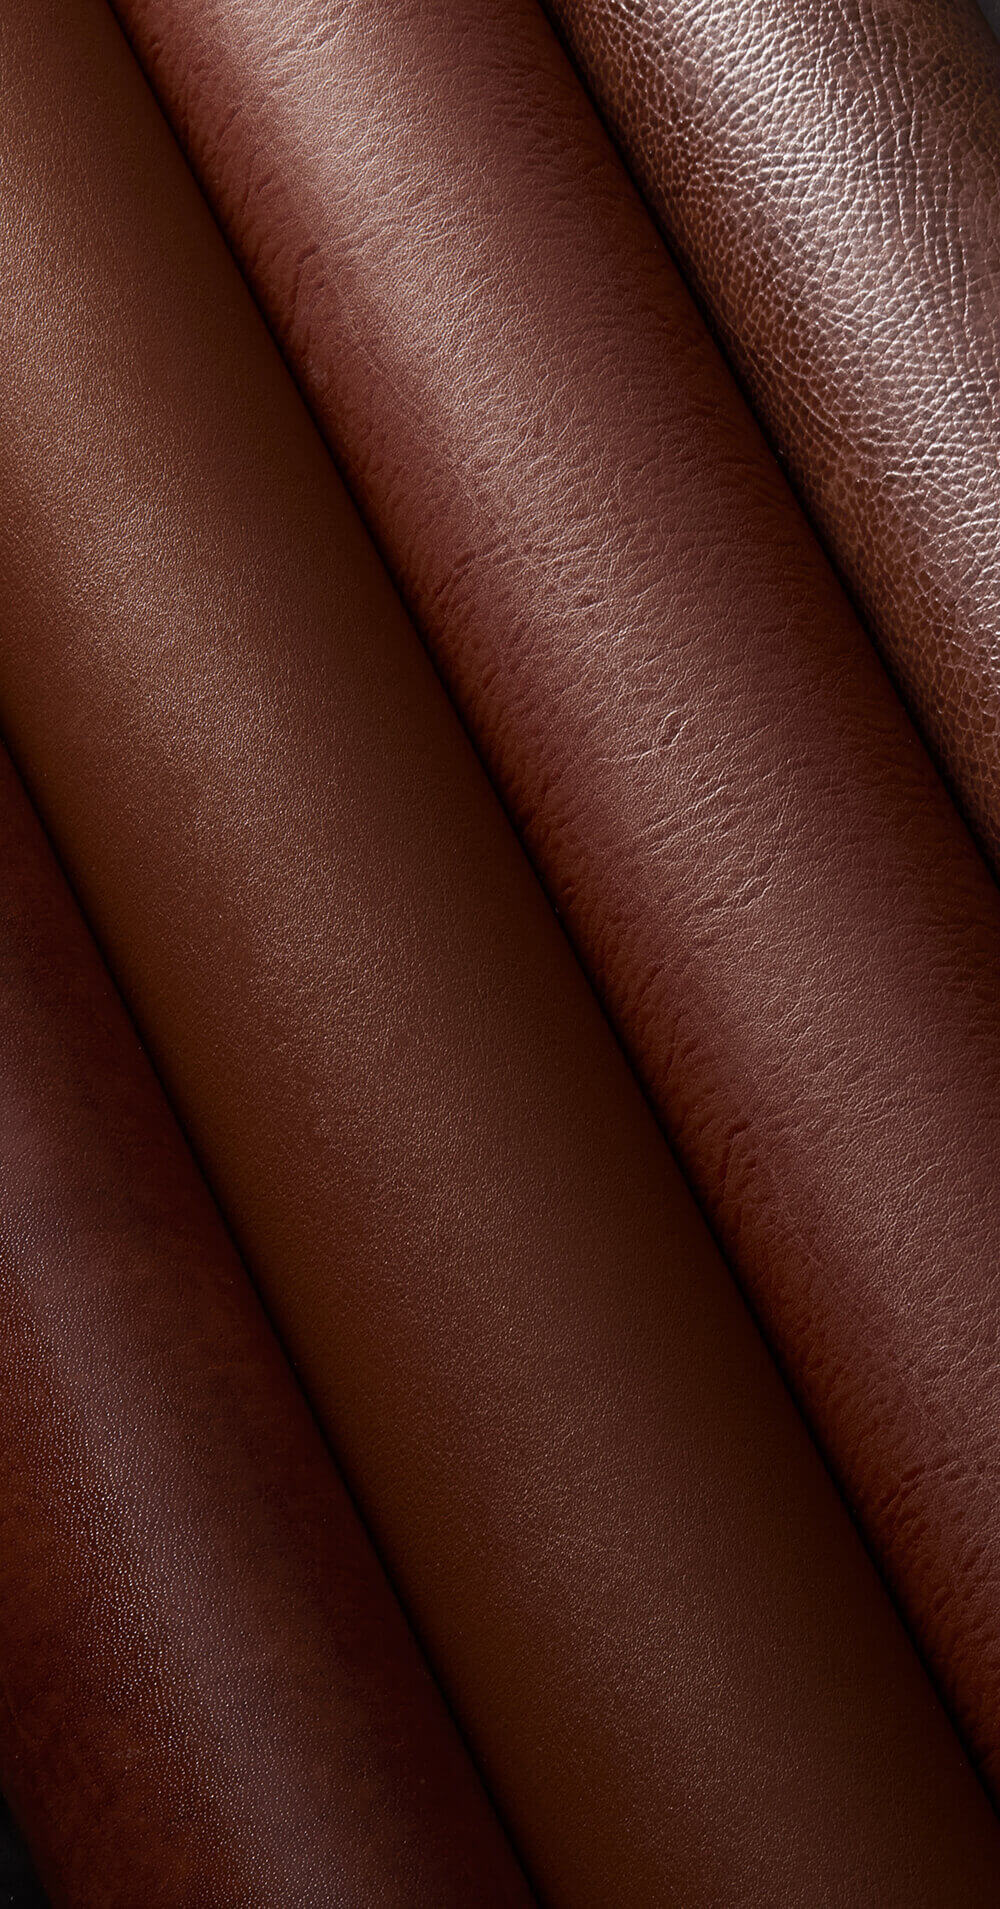 Cromwell Leather Group - Quality Leather Material Since 1899